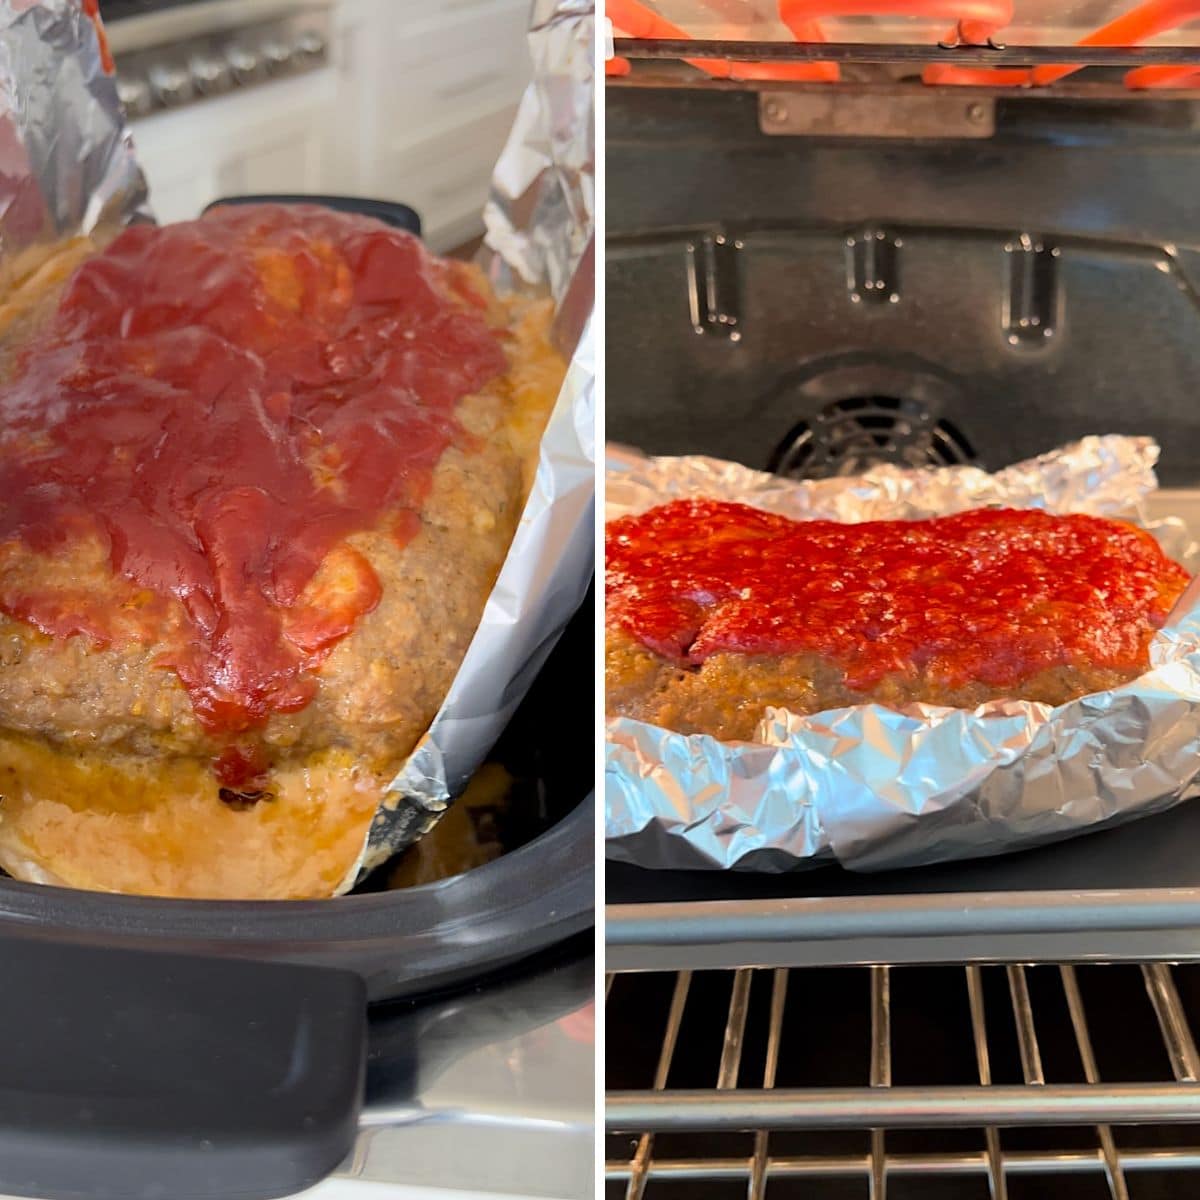 Removing the meatloaf with the foil sling then broiling in the oven.